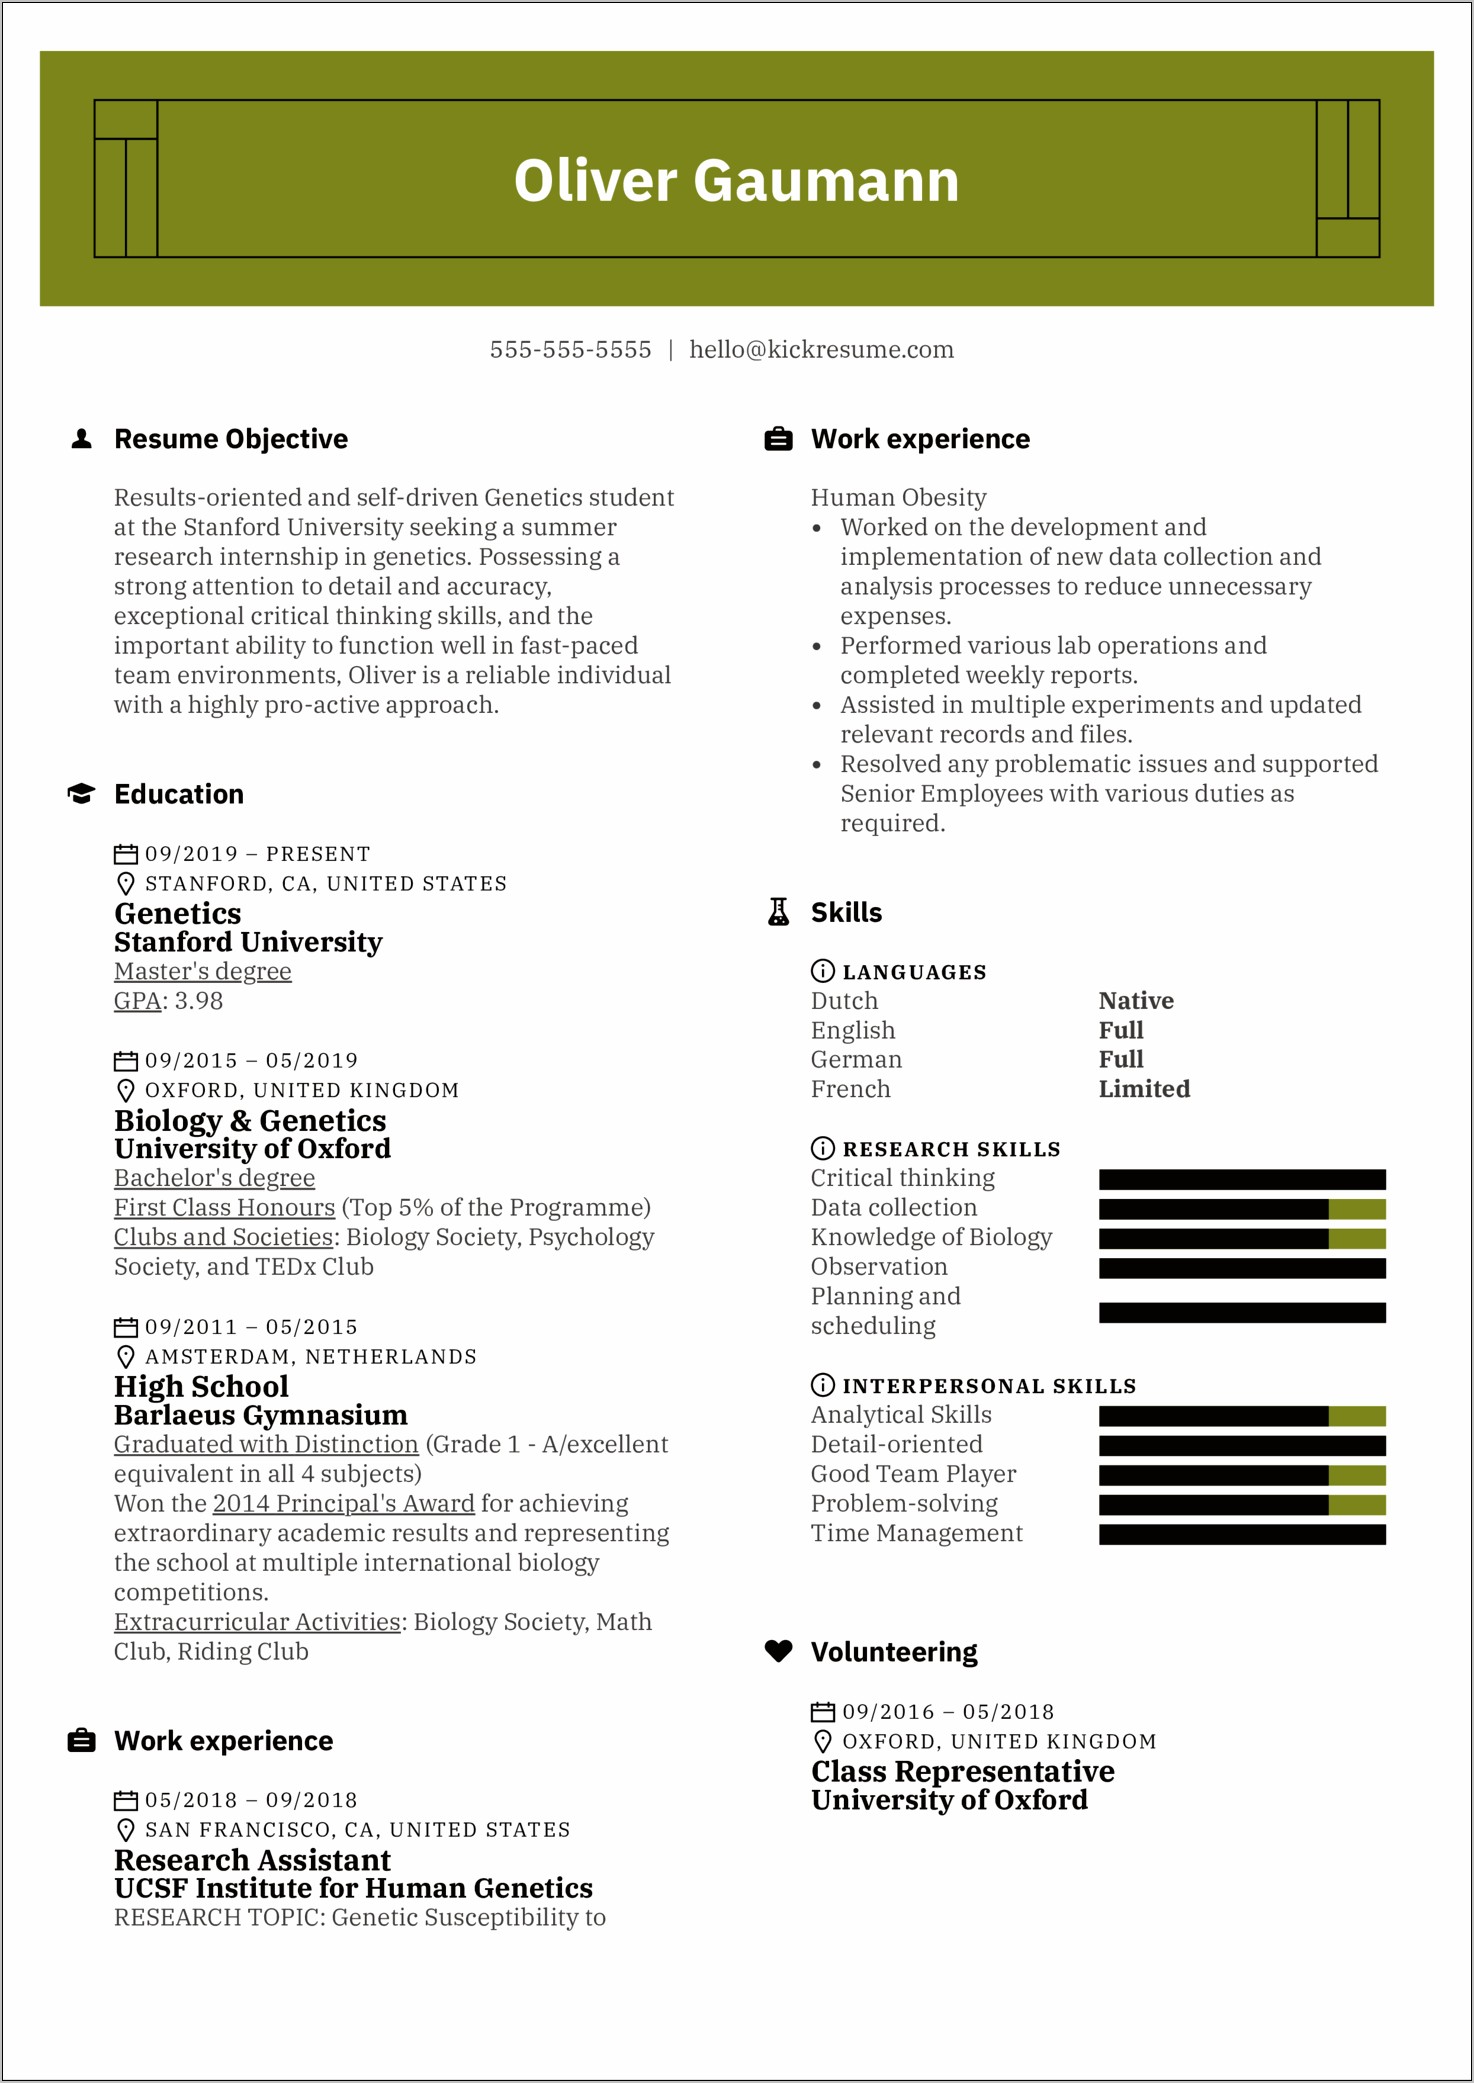 Example Of Resume With Masters Degree